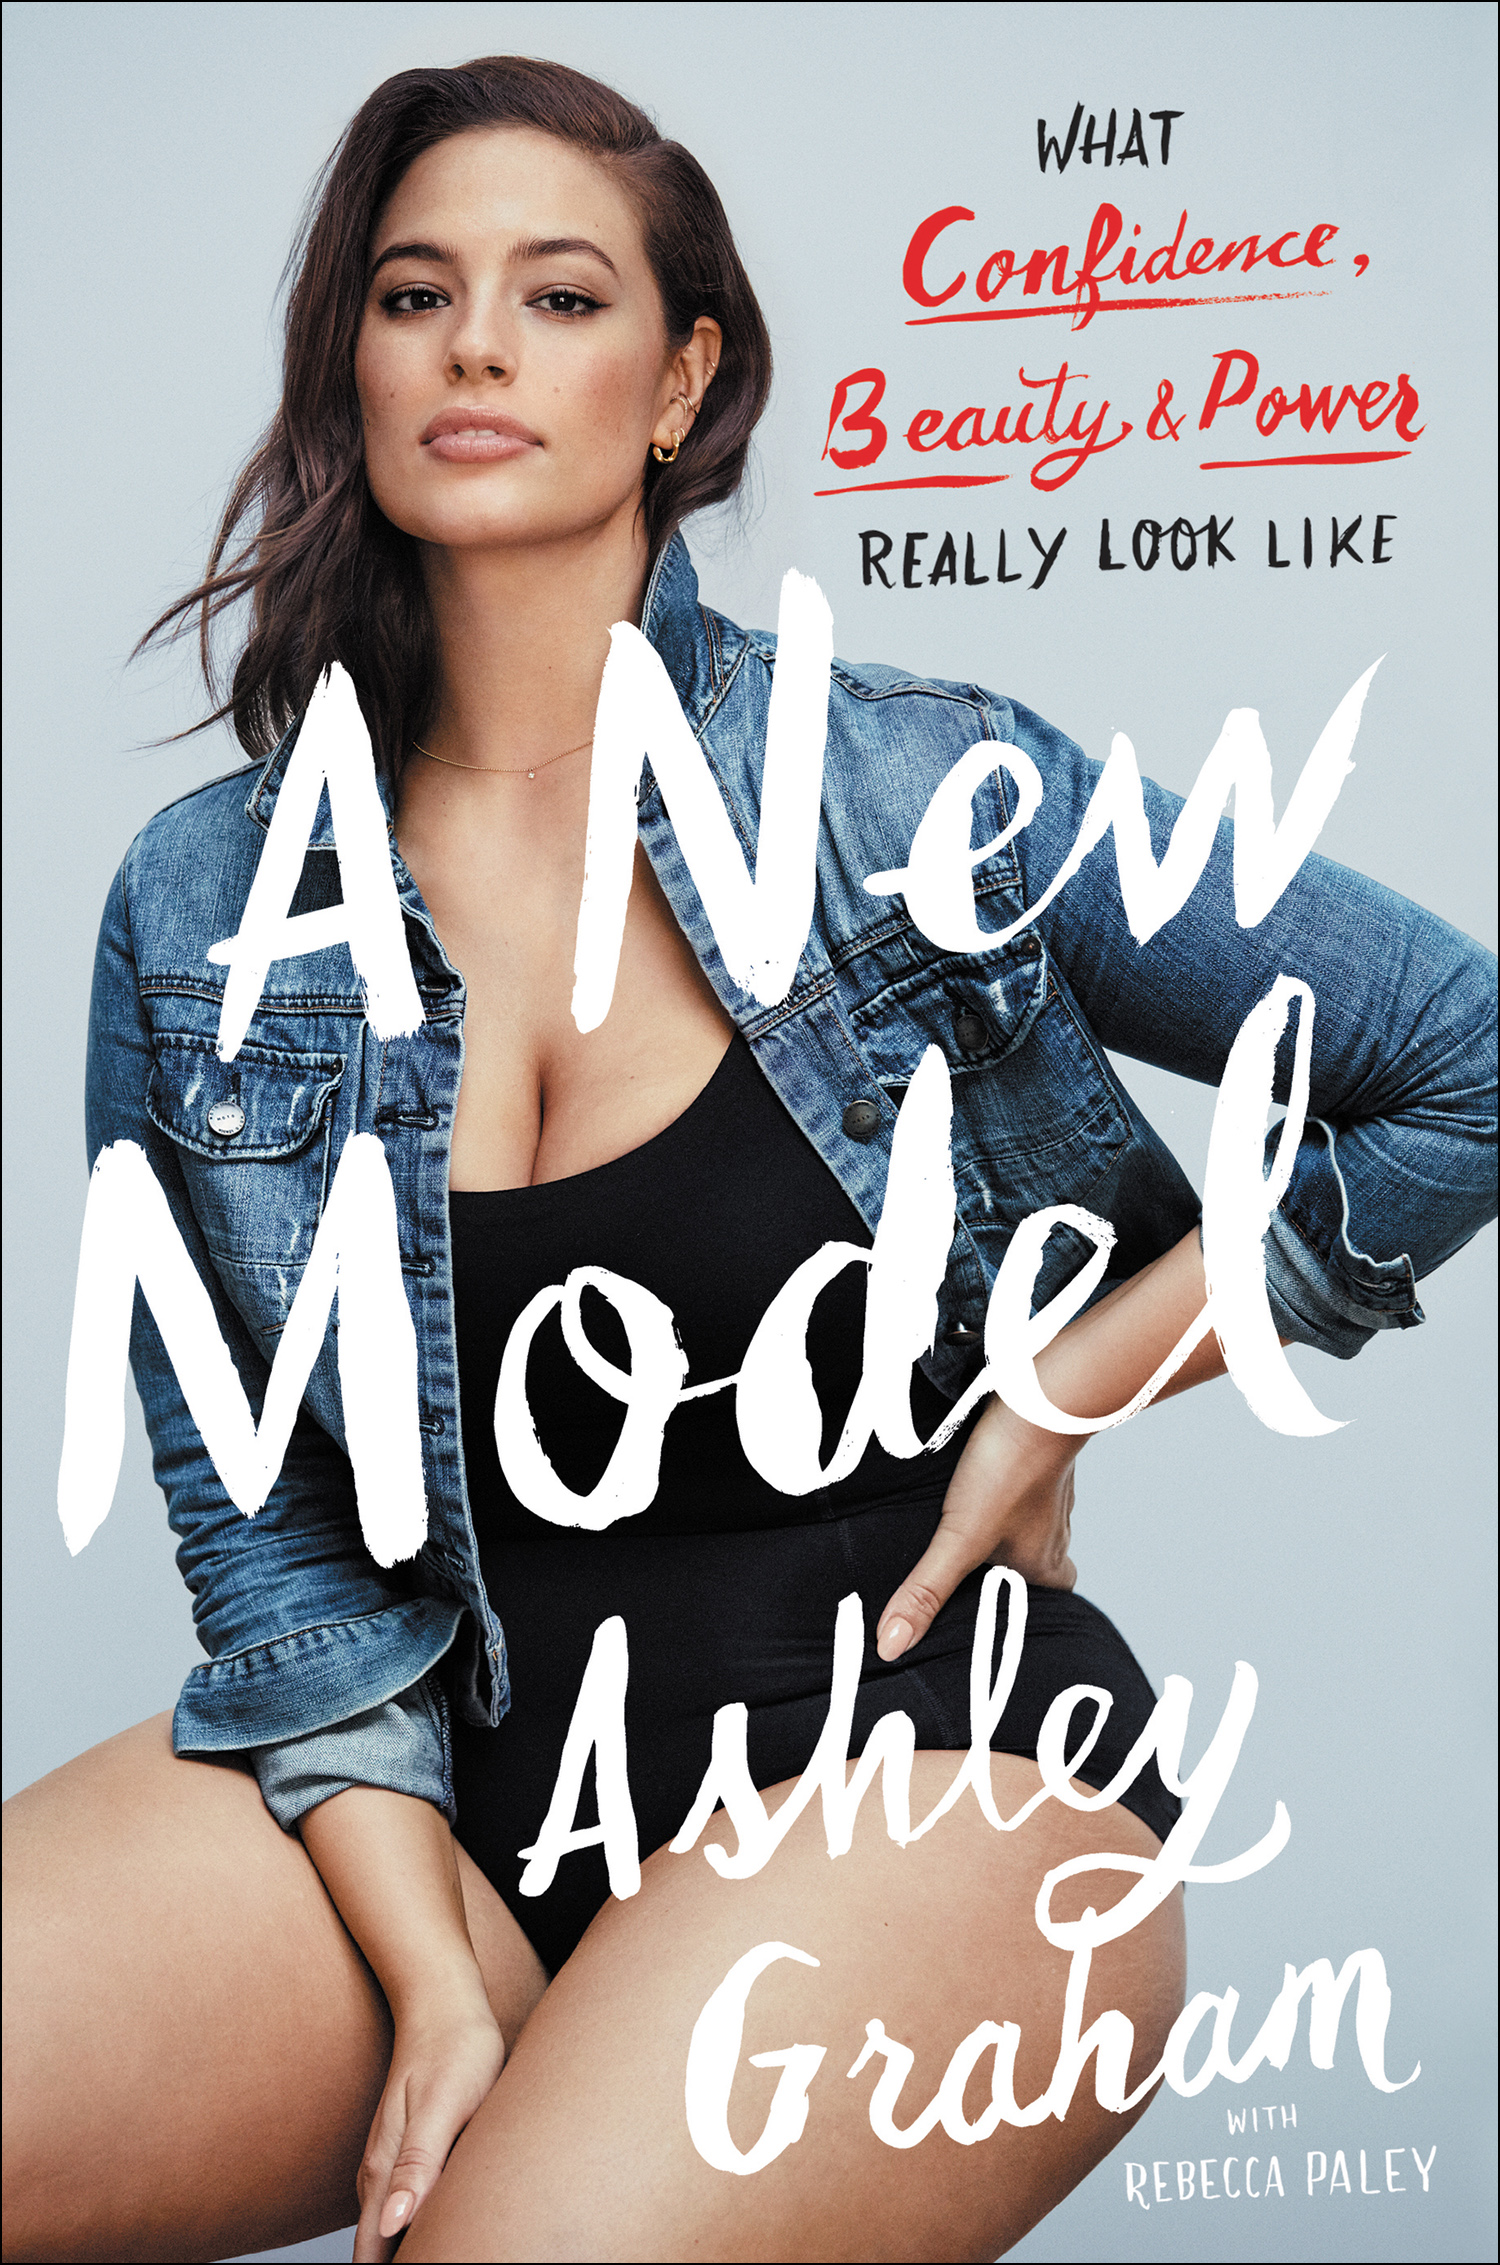 A new model what confidence, beauty, and power really look like cover image